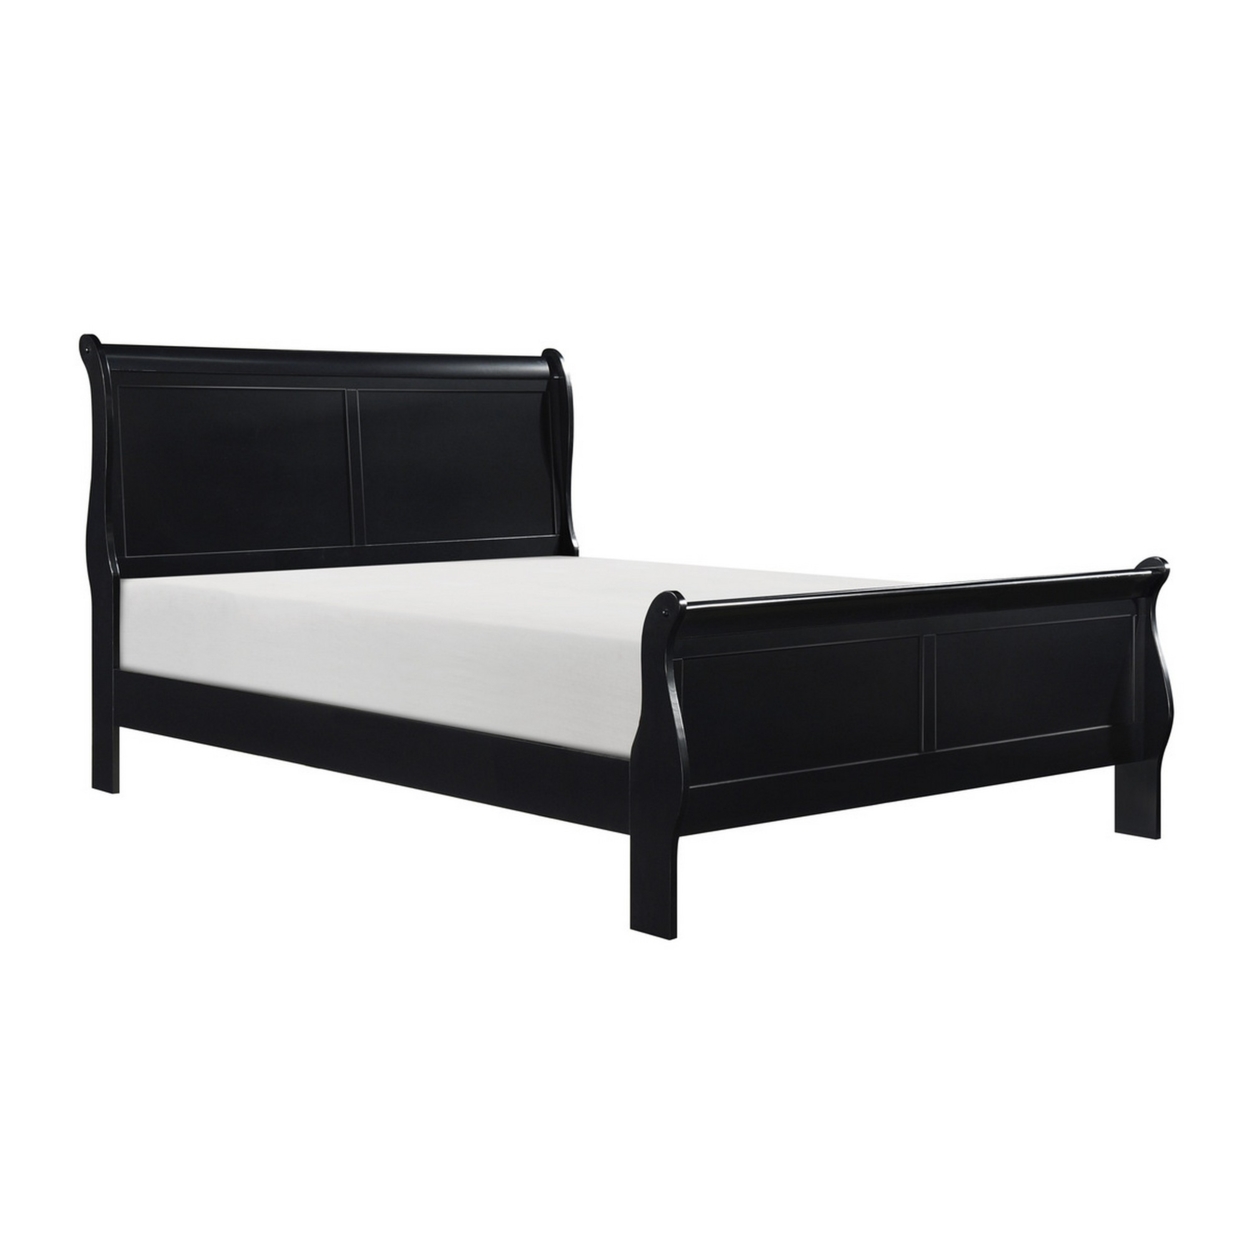 Gage Traditional Queen Size Sleigh Bed, Wood Frame, Bold Jet Black Finish- Saltoro Sherpi